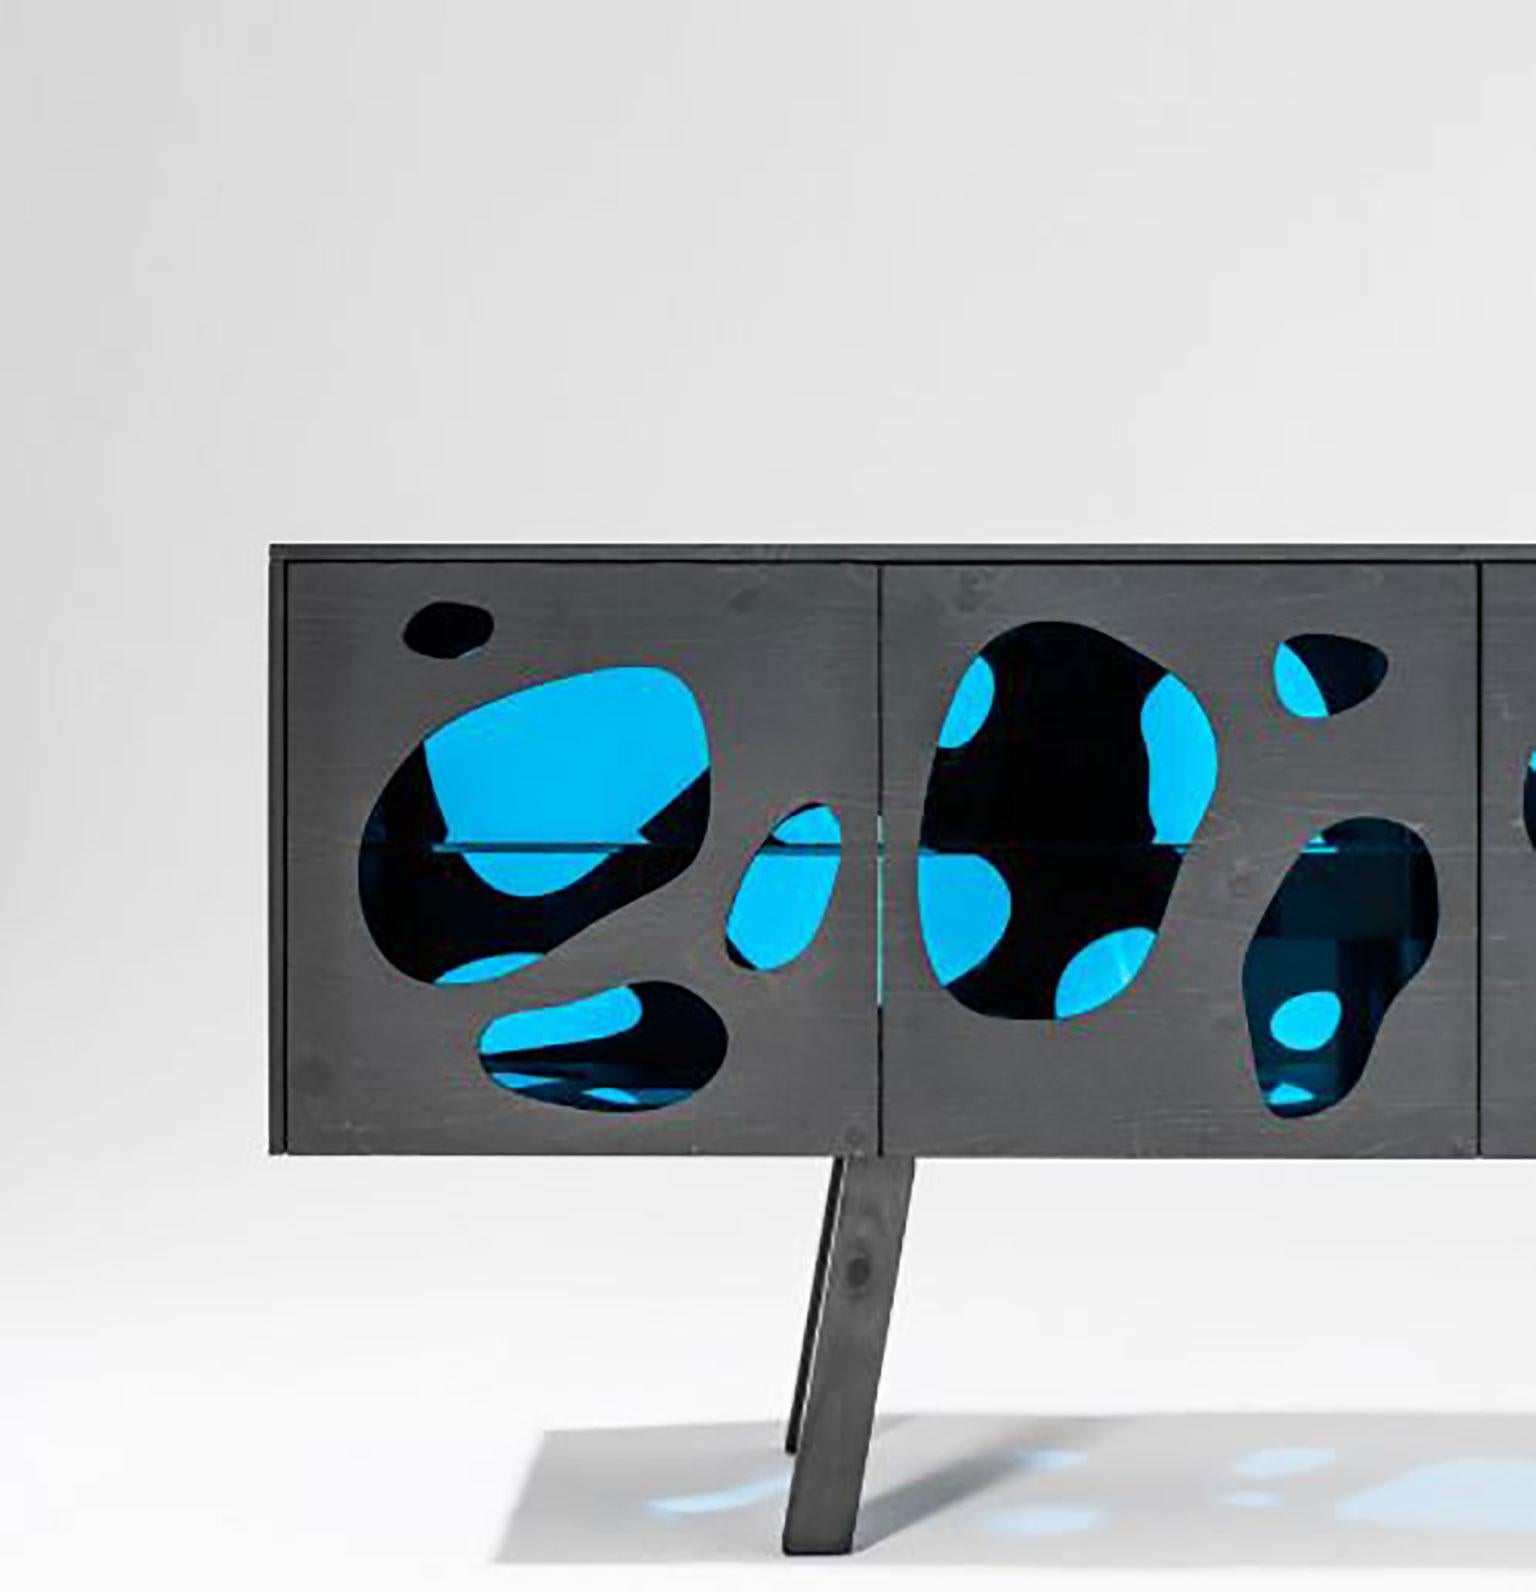 Aquario cabinet designed by Campana Brothers for BD Barcelona. The structure follows a highly unique and creative design. This unusual cabinet made with glass in a shape similar to water droplets veneered in natural ash or pine stained in grey which